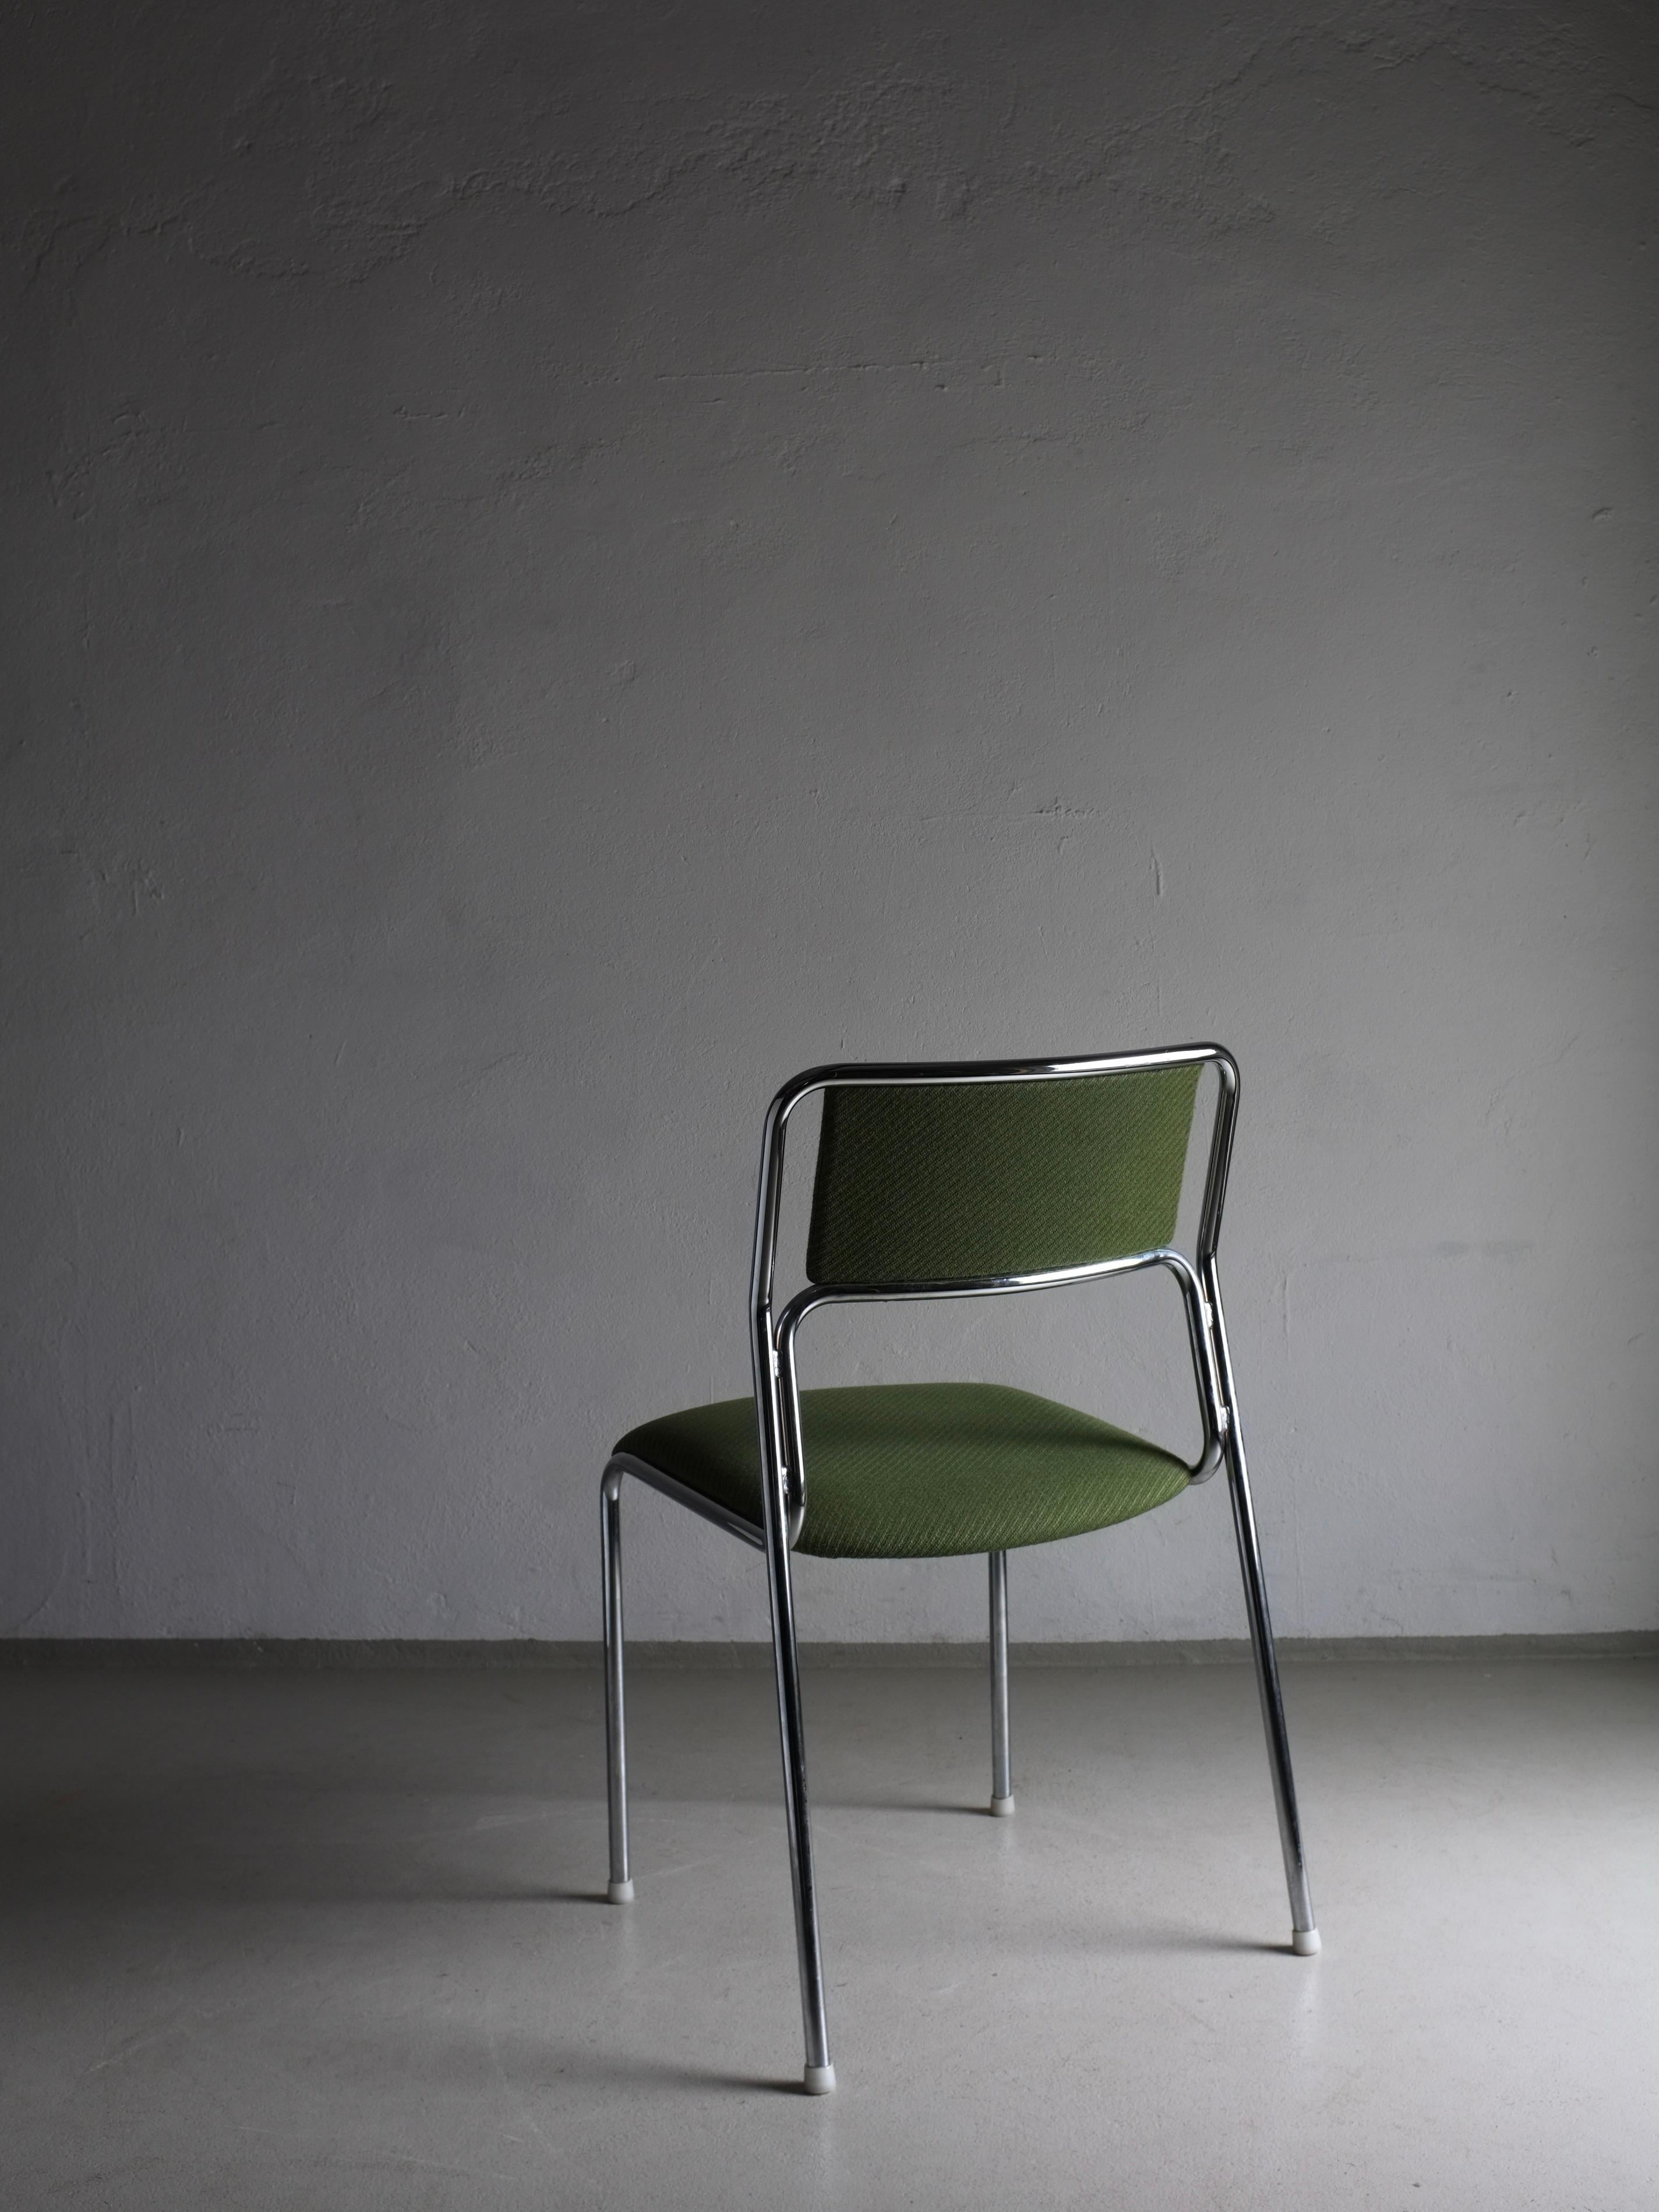 20th Century 3 Green Tubular Steel Stacking Chairs, Sweden 1970s For Sale